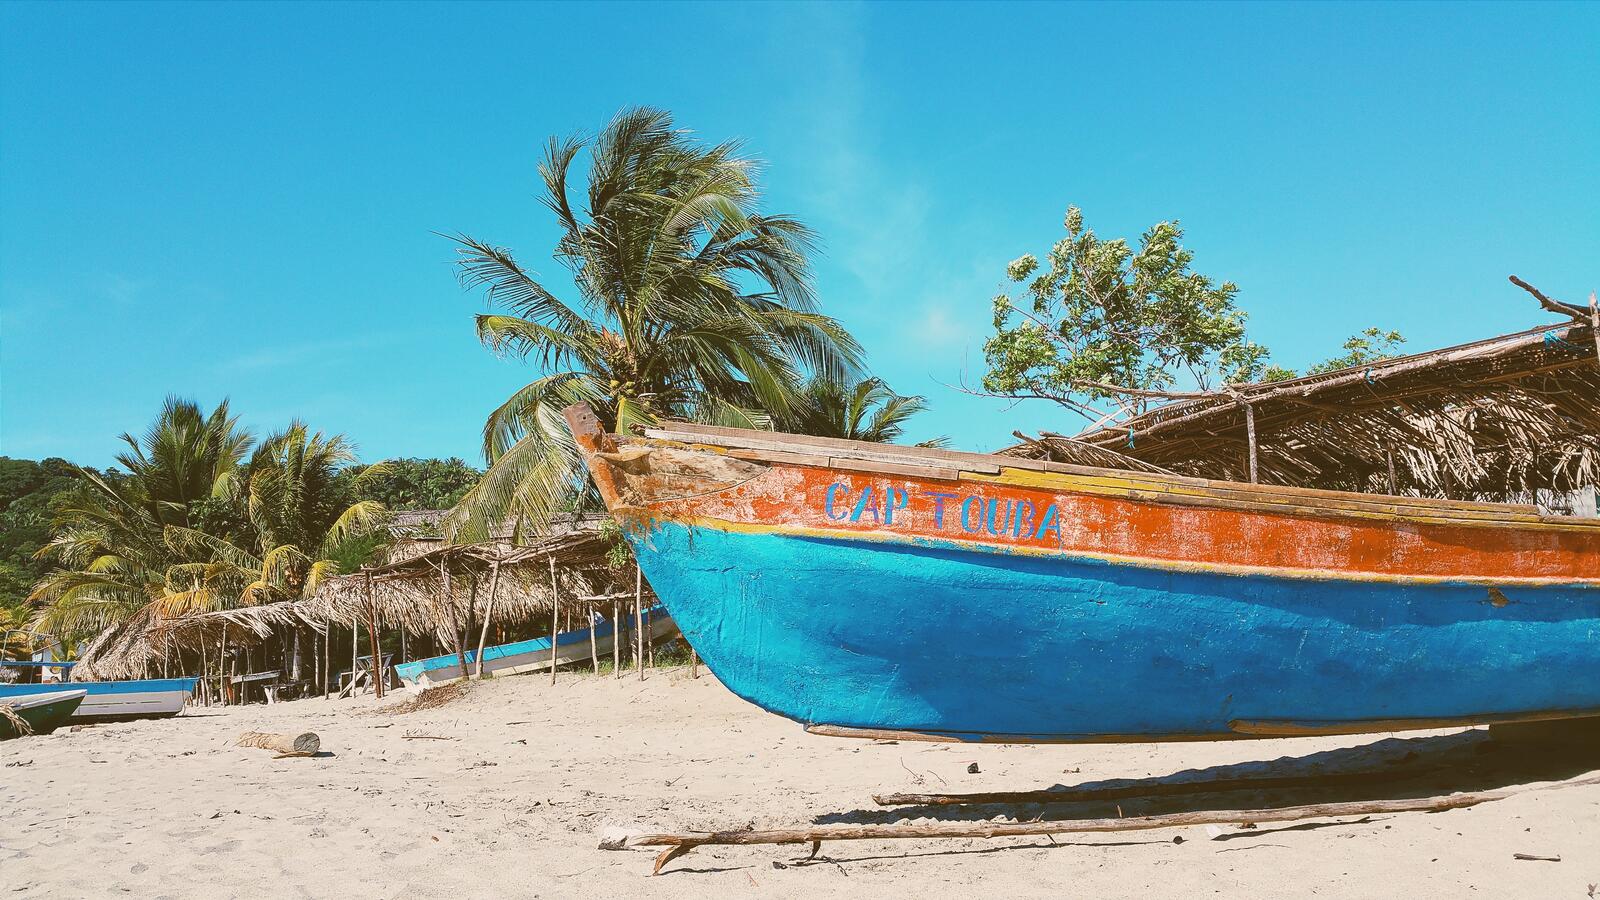 Free photo An old abandoned boat on a beach with palm trees